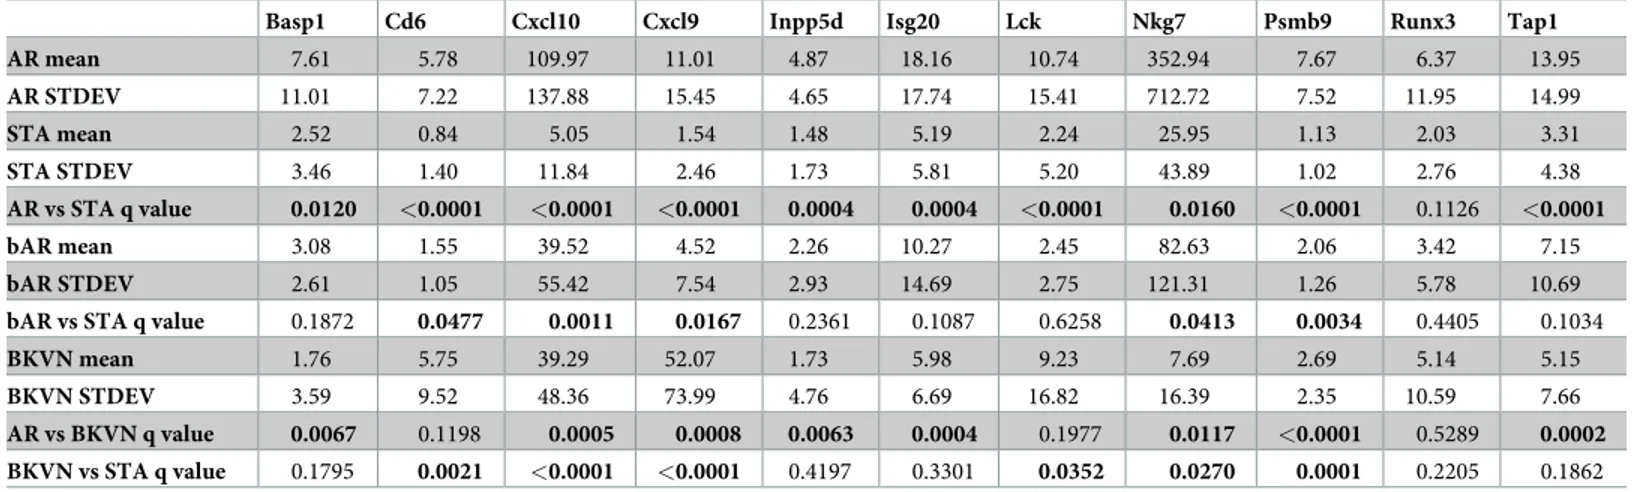 Table 2. Gene expression levels of CRM genes across different phenotypes.